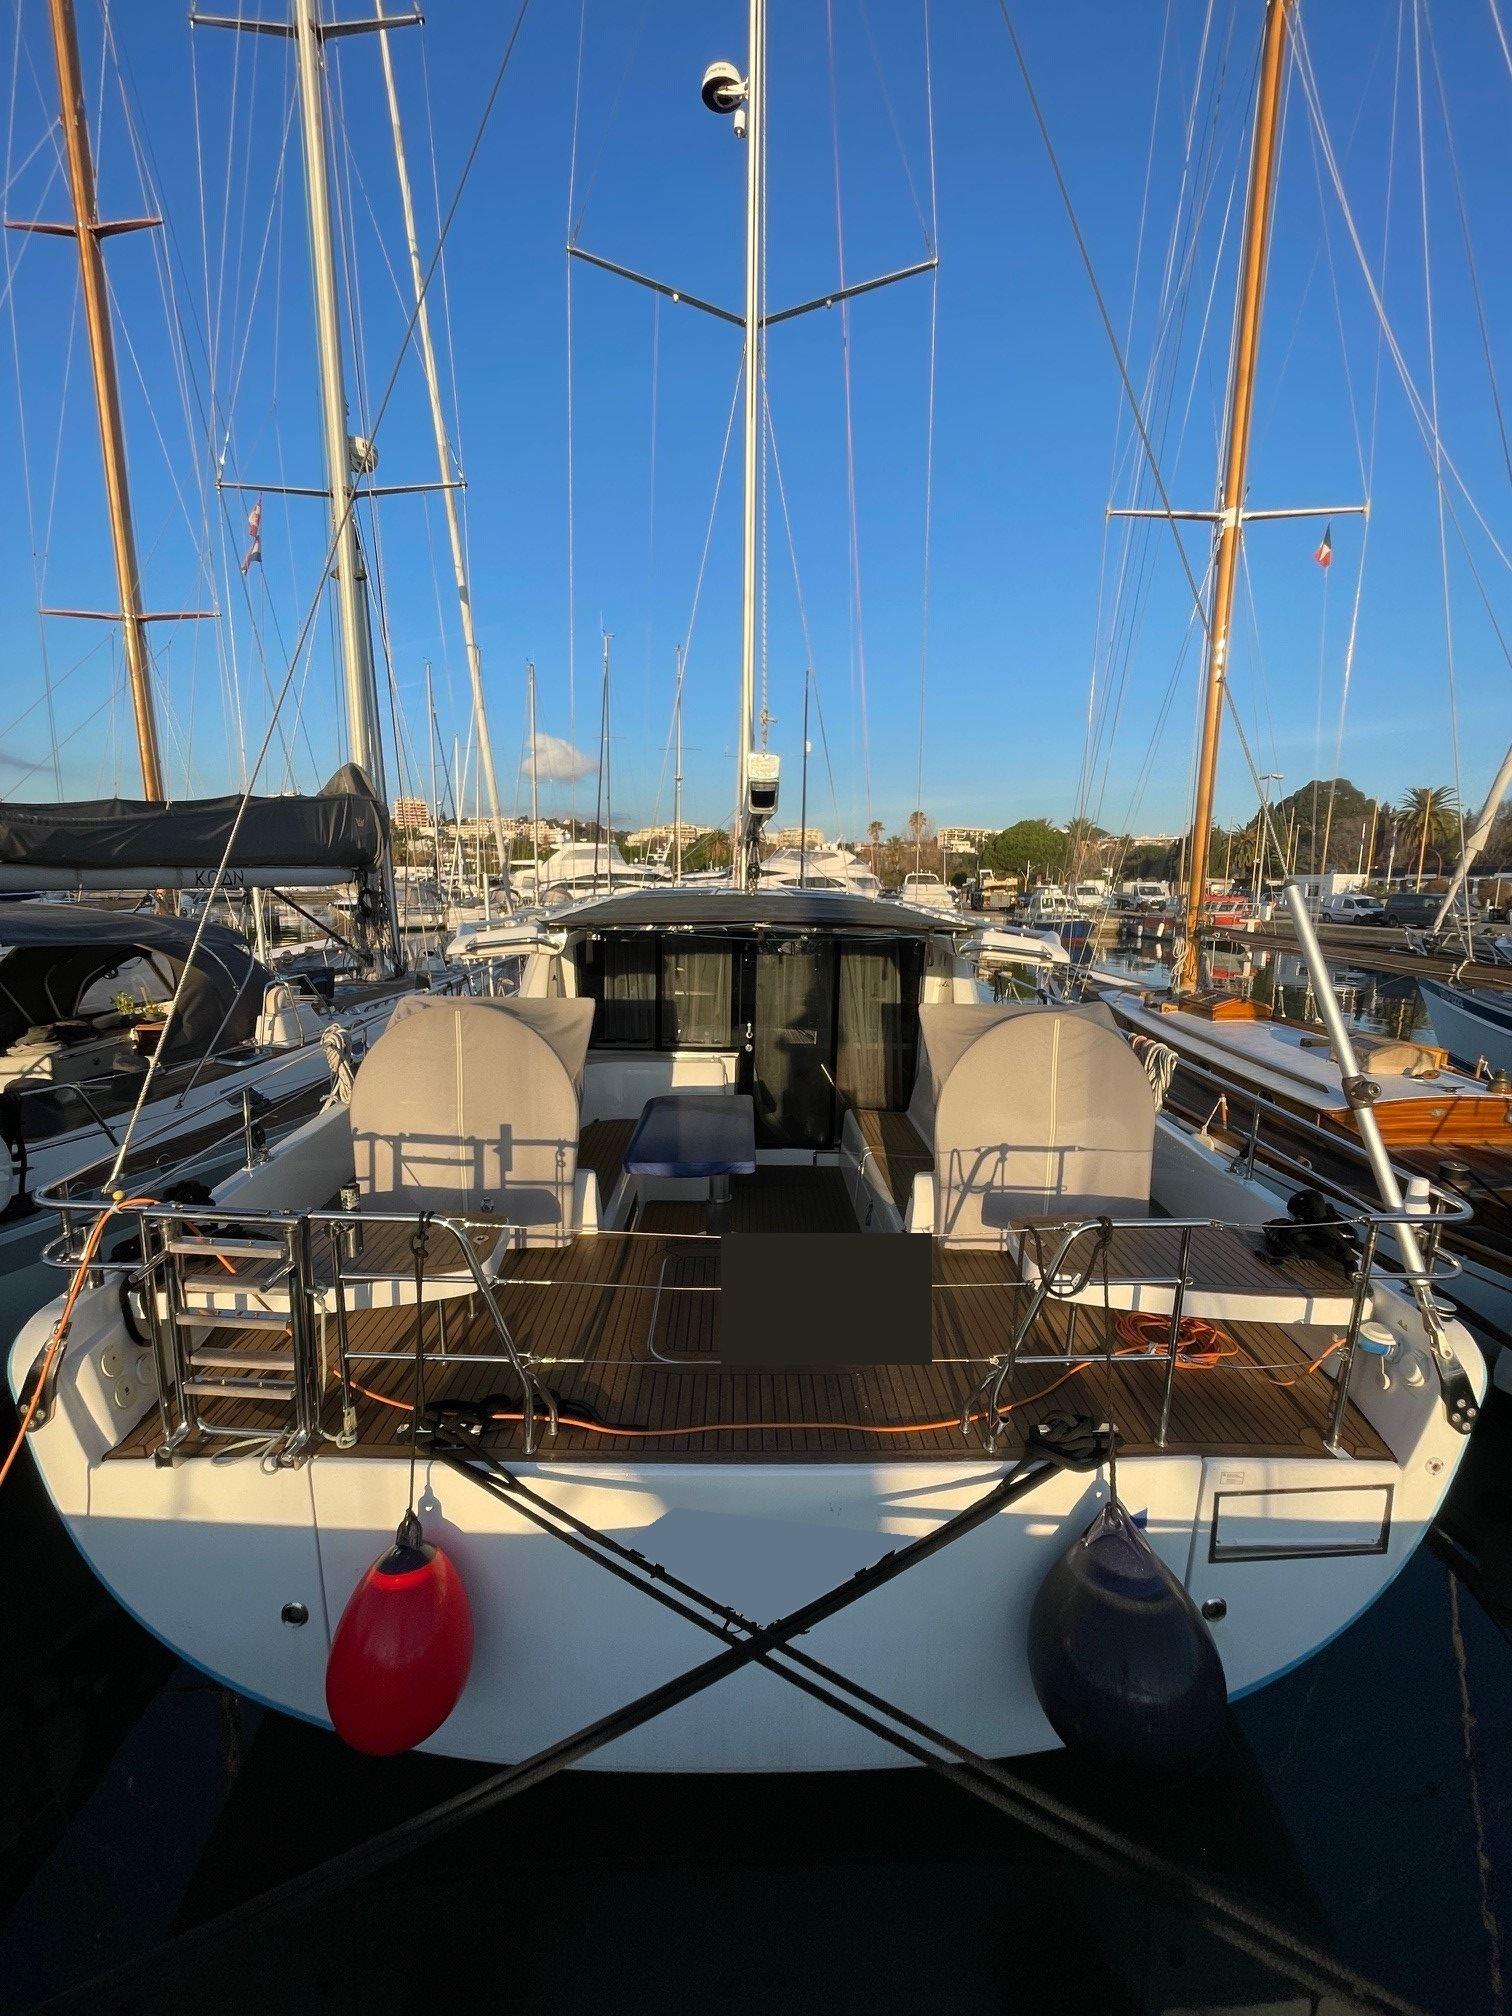 2018 Moody DS 54 Pilothouse for sale - YachtWorld